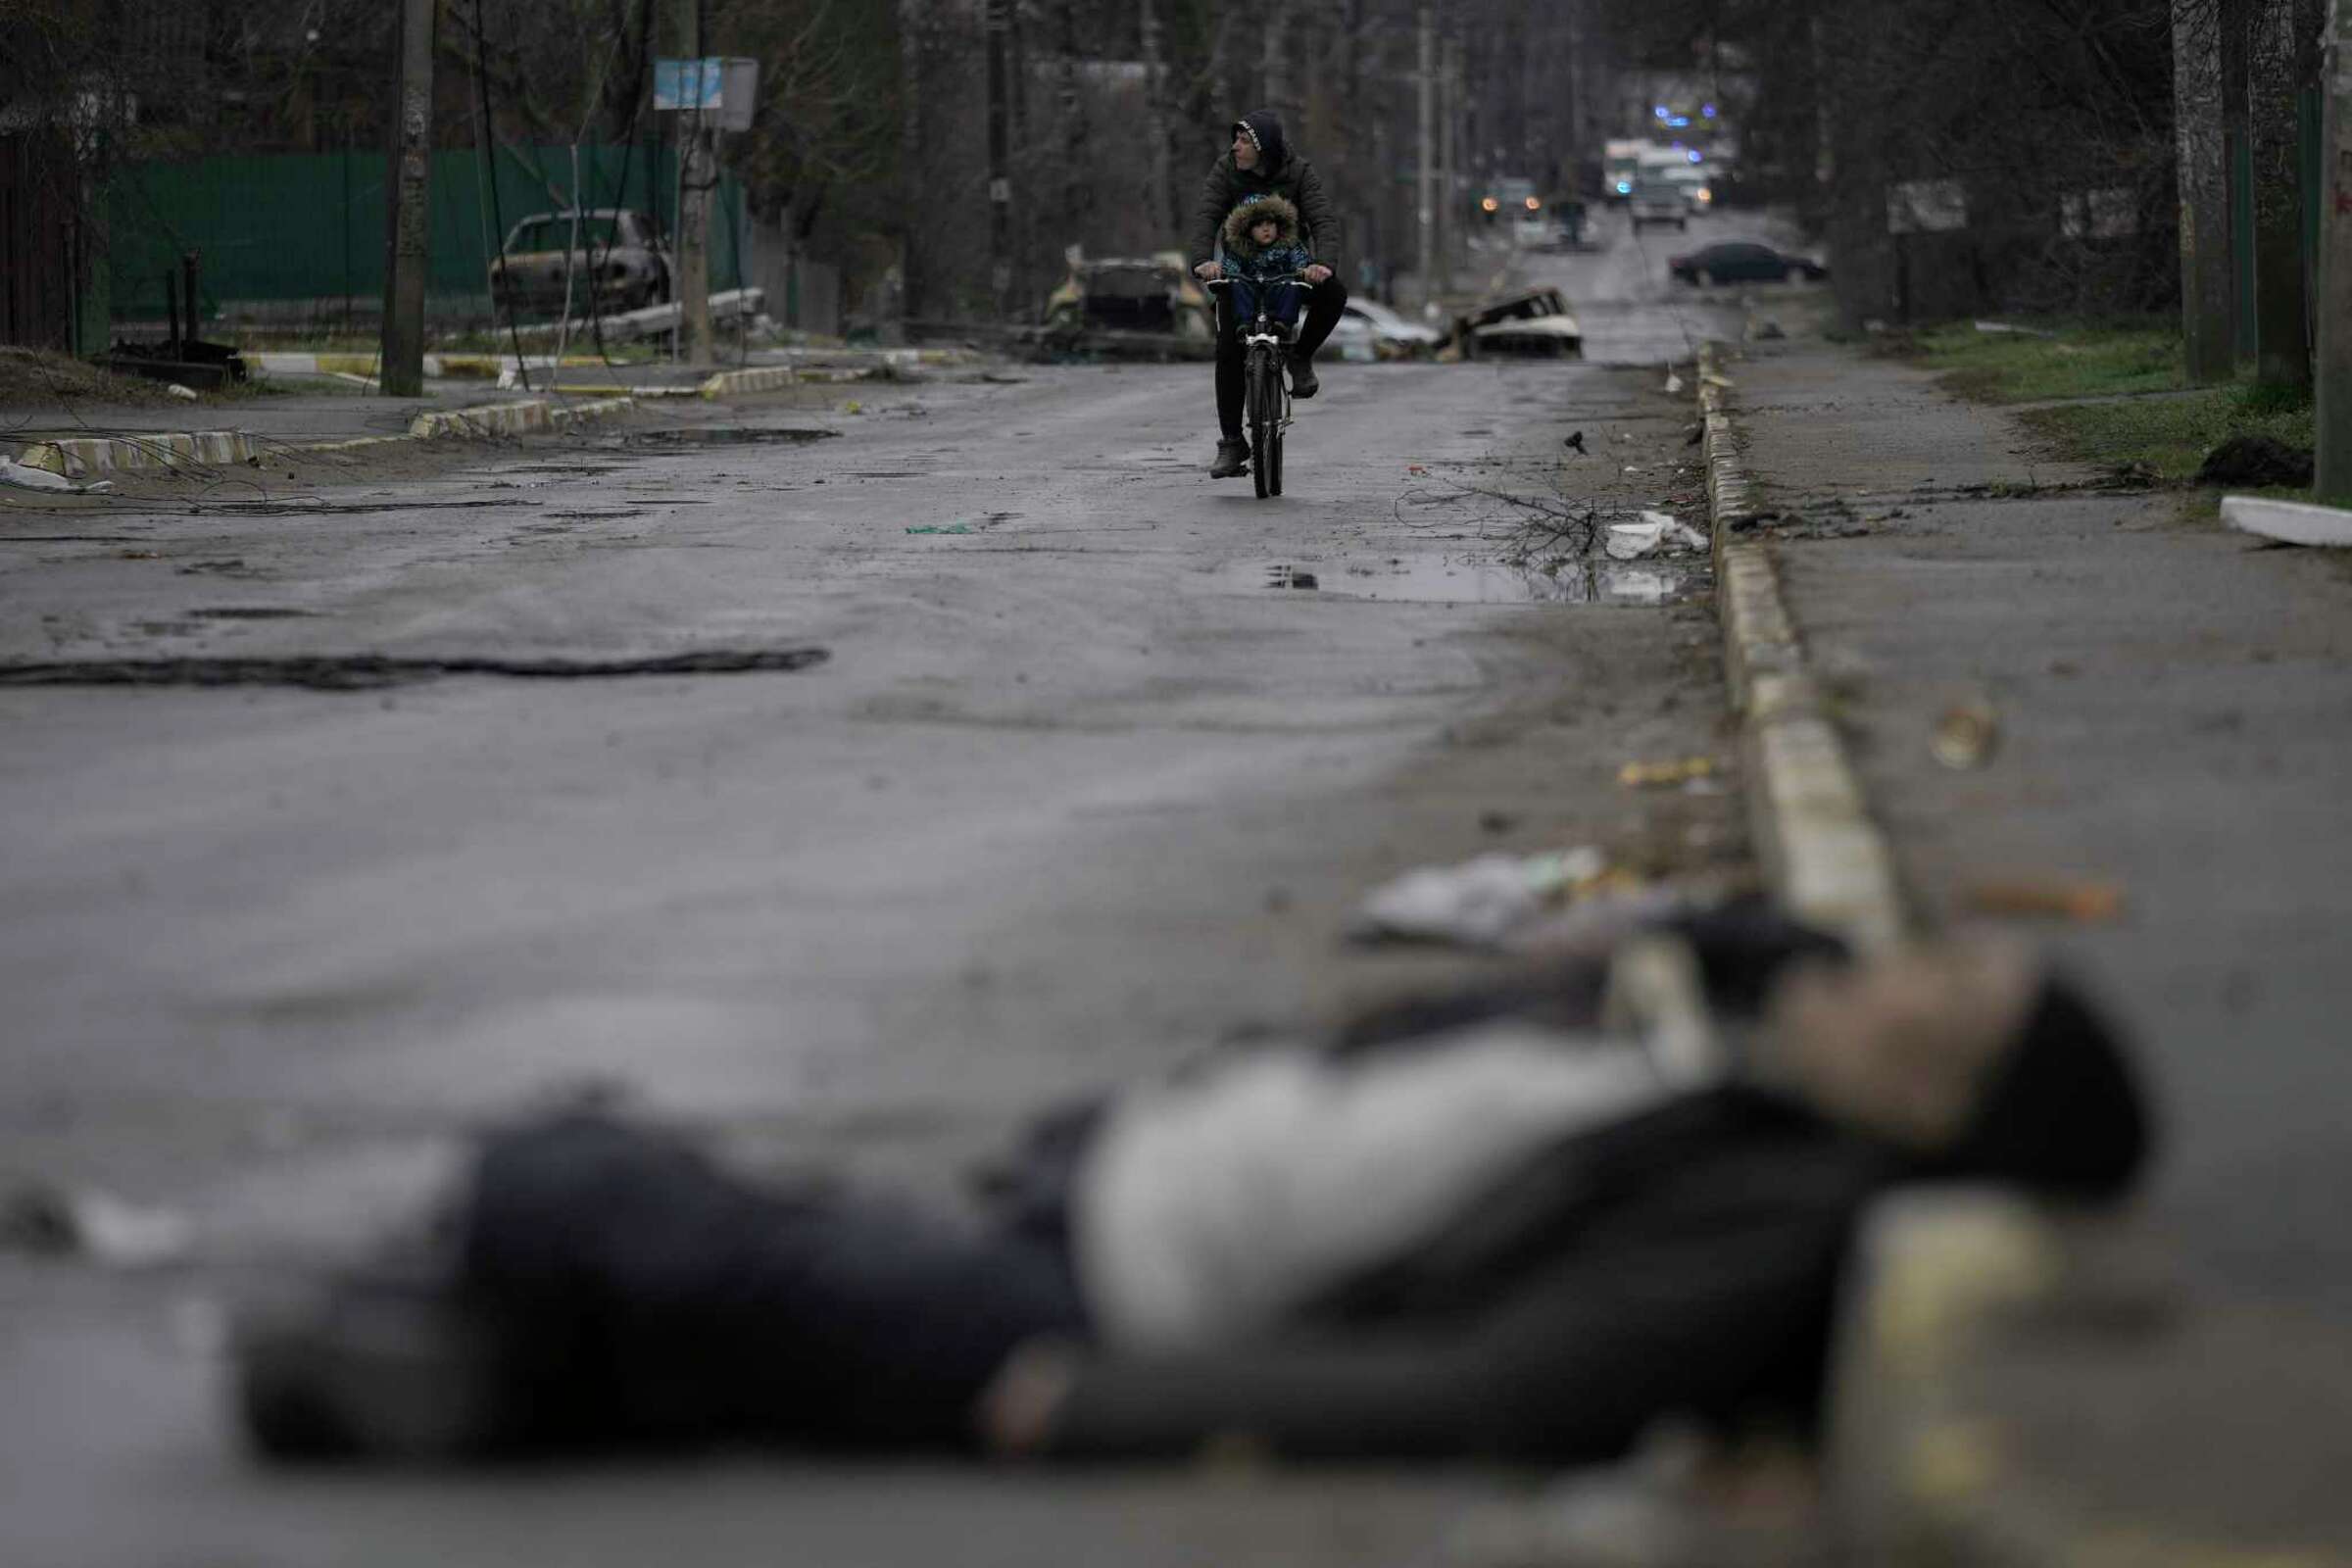 A man and child on a bicycle encounter the body of a civilian lying on a street in the formerly Russian-occupied Kyiv suburb of Bucha, Ukraine, on Saturday, 2 April 2022. Photo: Vadim Ghirda / AP